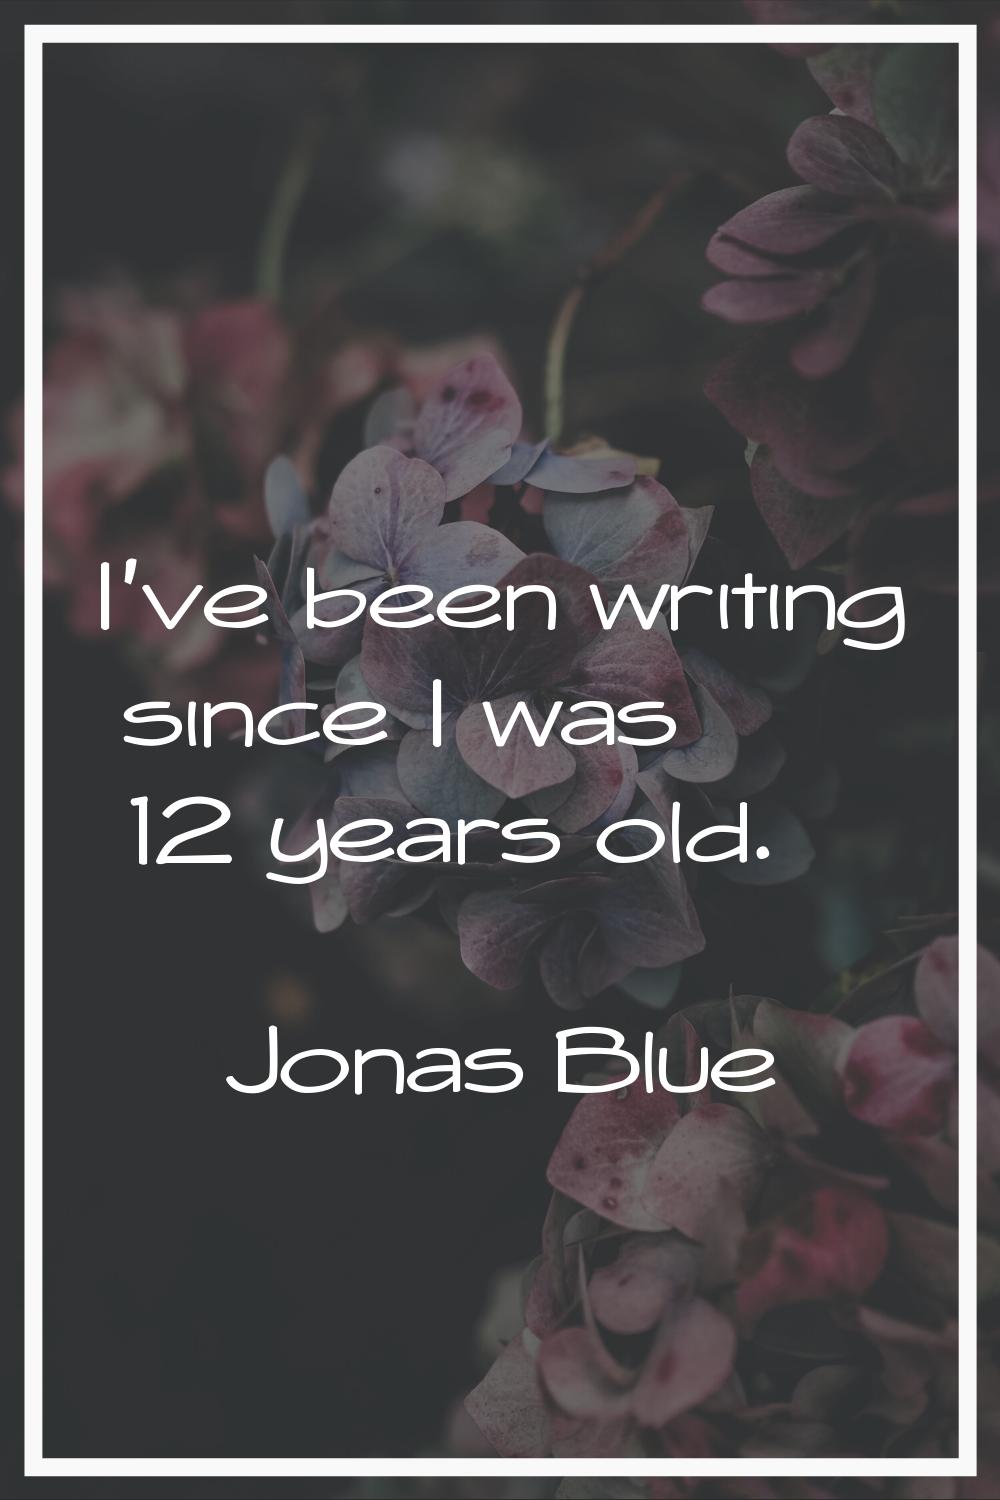 I've been writing since I was 12 years old.